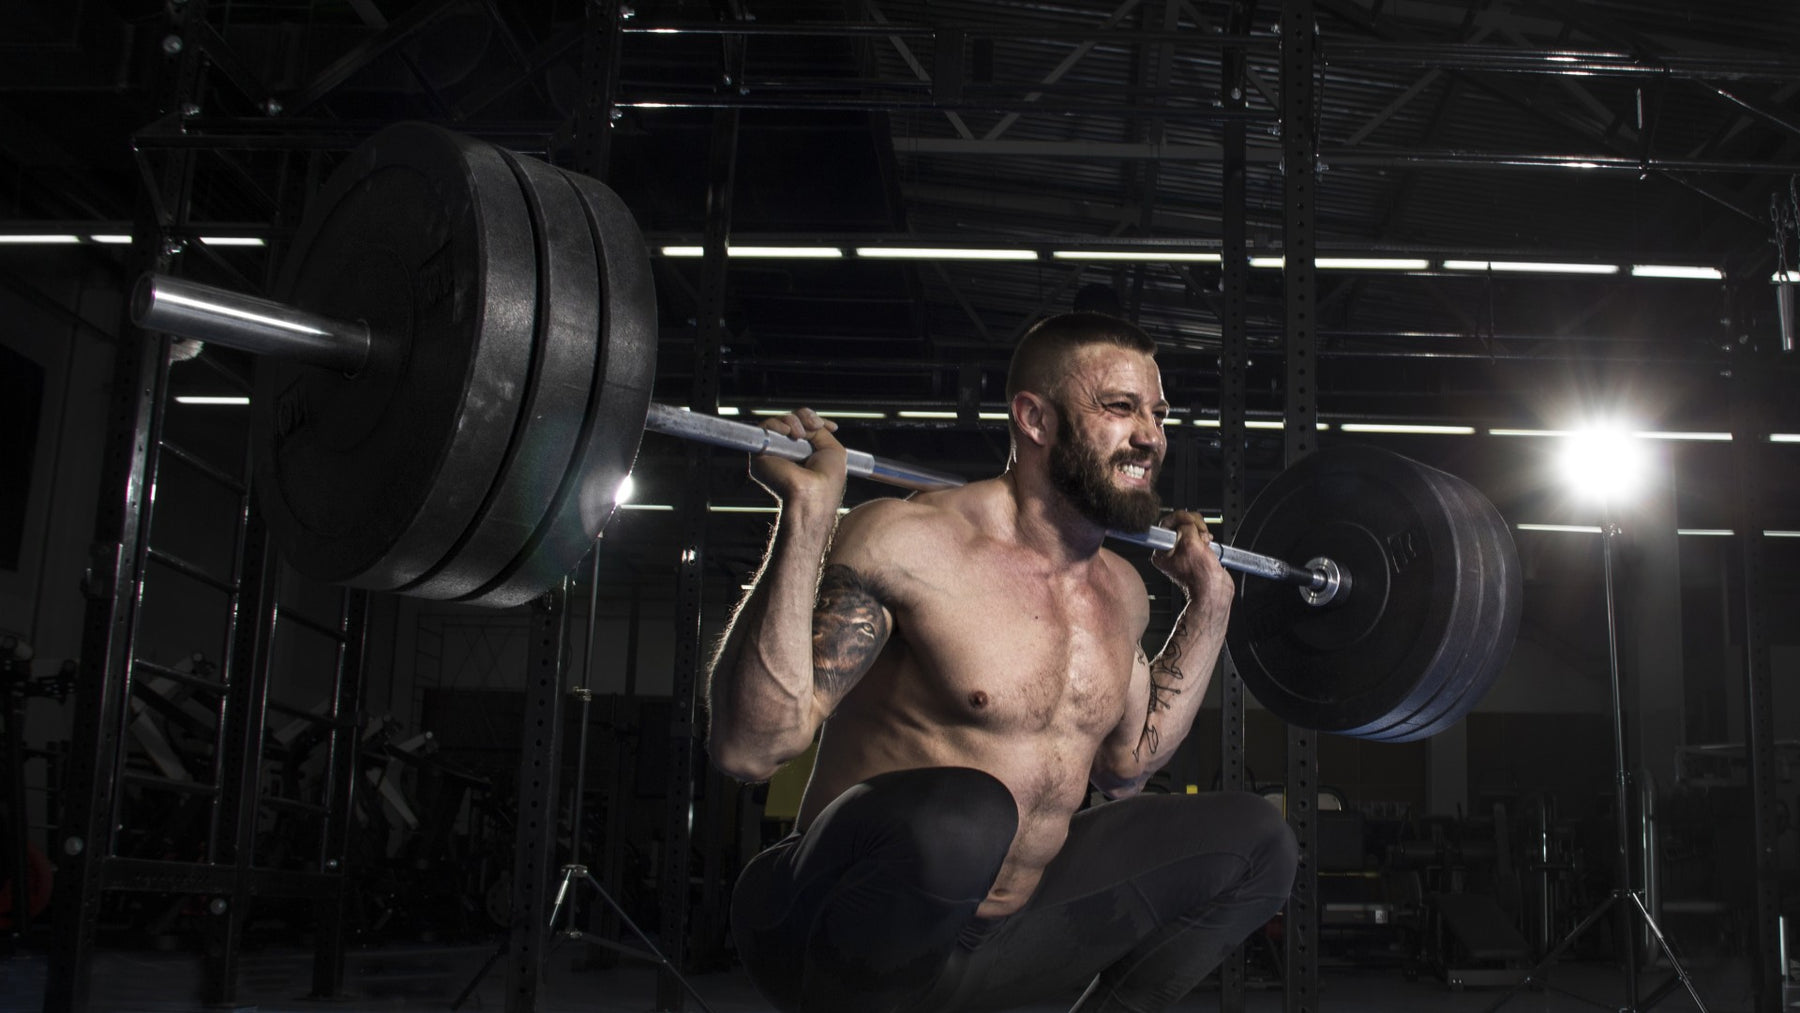 Steve Shaw's 20 Rep Squat Routine for Fast Mass